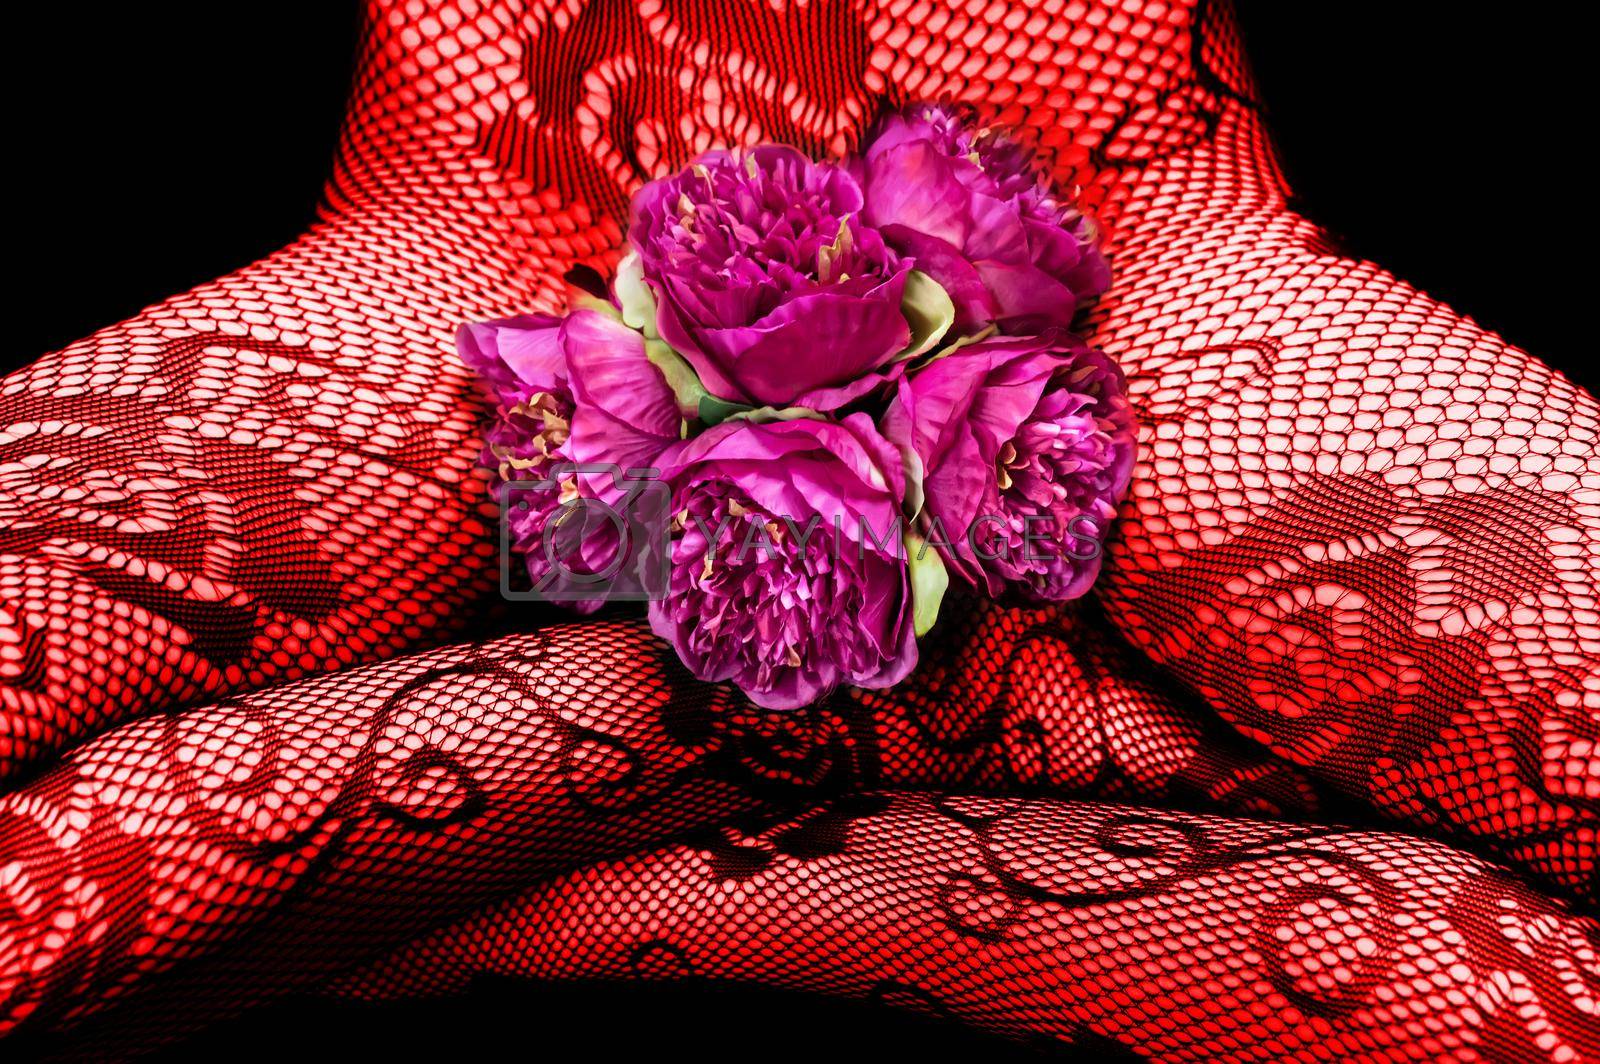 Royalty free image of Woman in fishnet tights with pink peonies by palinchak